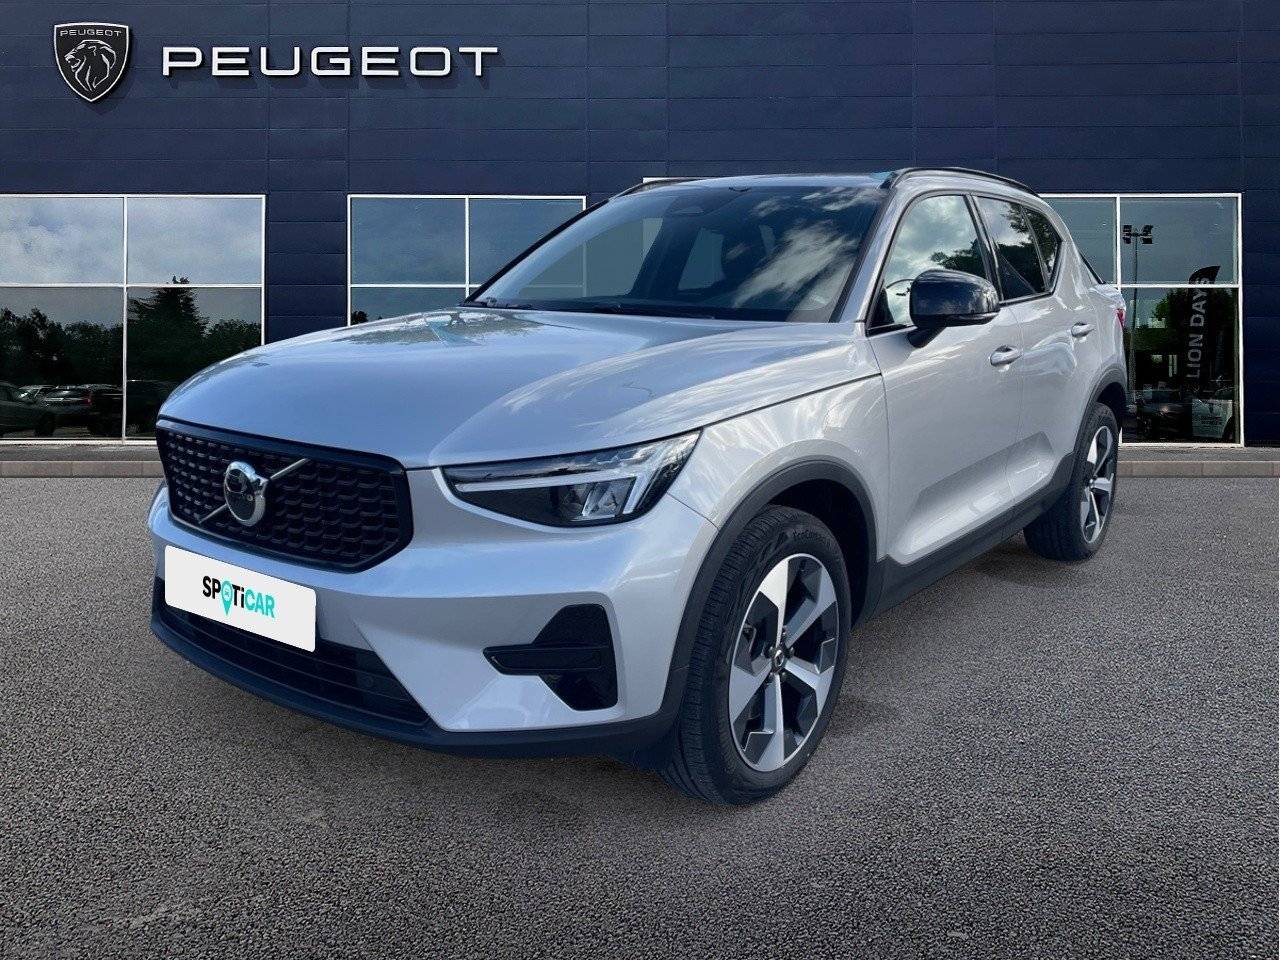 VOLVO XC40 | XC40 B3 163 ch DCT7 occasion - Peugeot Pertuis